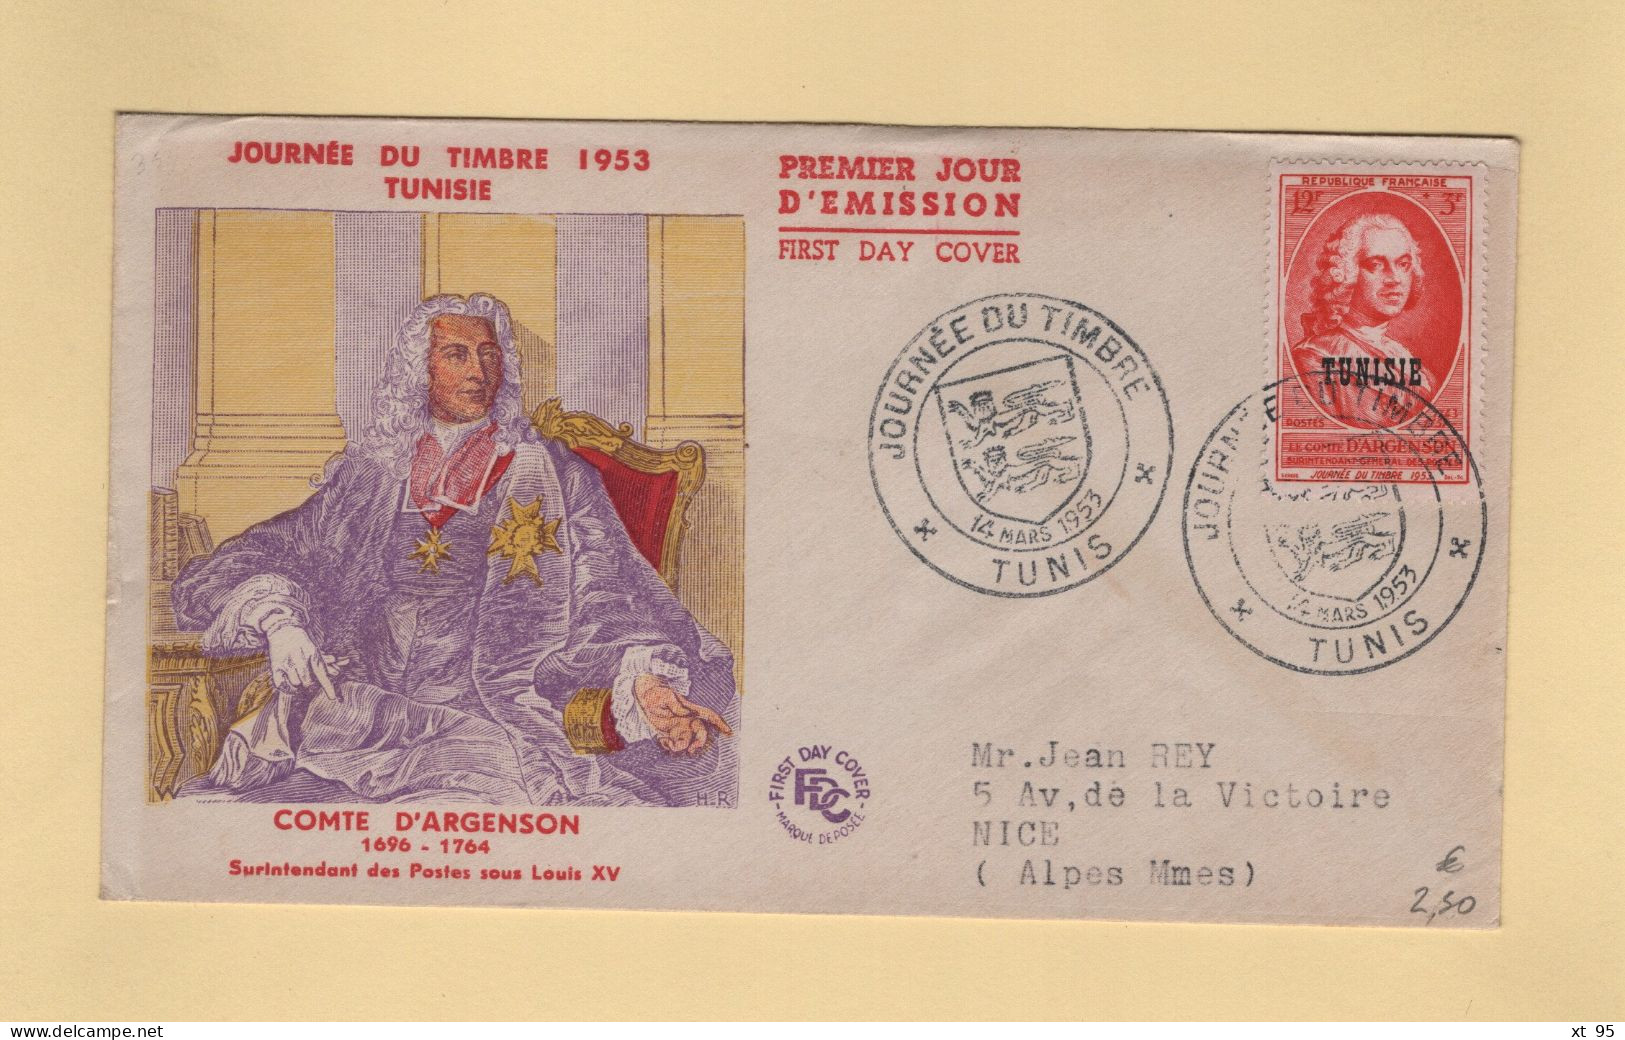 Tunisie - Journee Du Timbre - 1953 - Covers & Documents